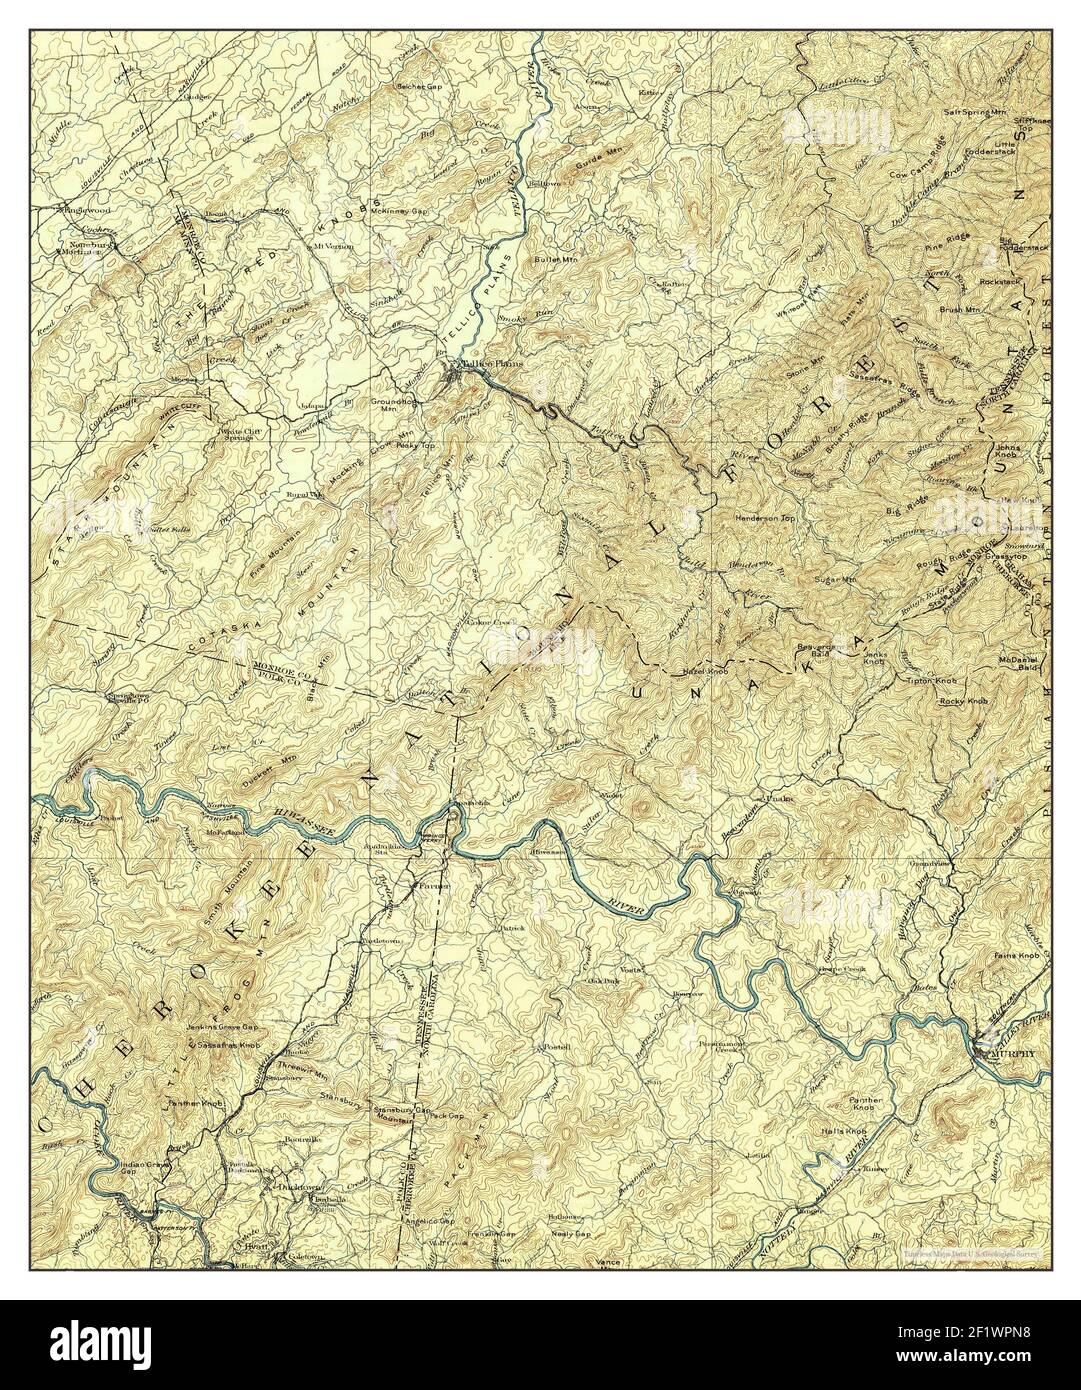 Murphy, Tennessee, map 1914, 1:125000, United States of America by Timeless Maps, data U.S. Geological Survey Stock Photo